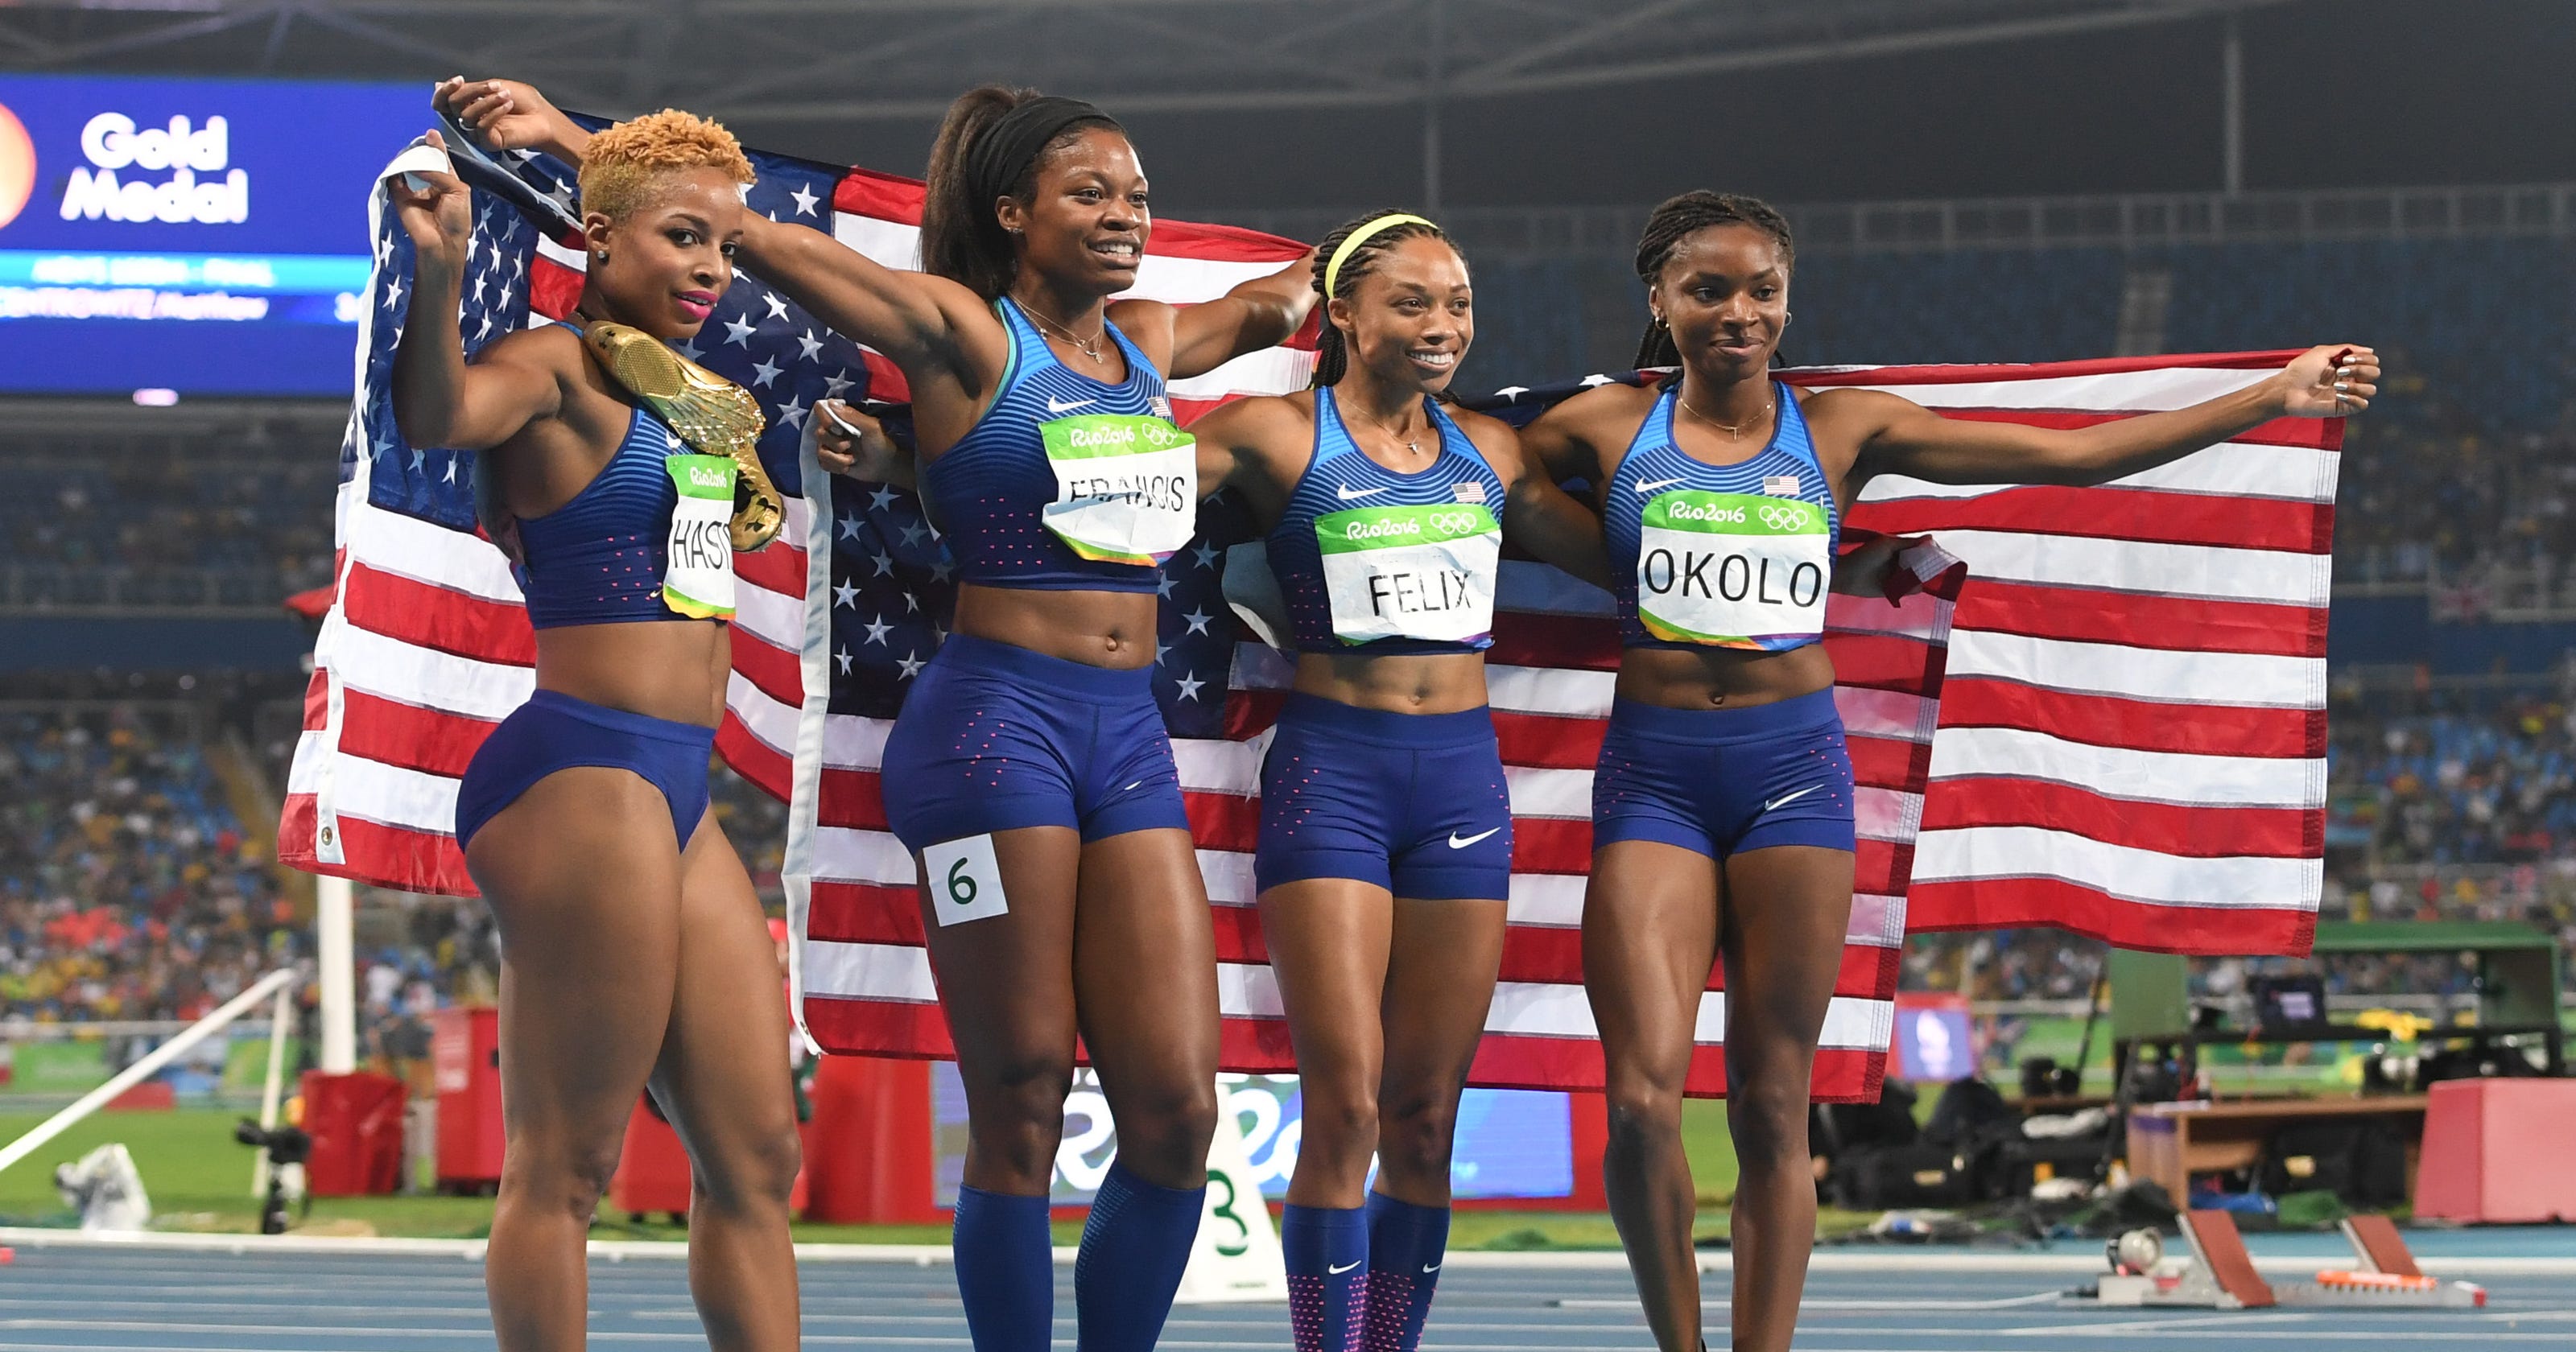 U.S. women cruise to gold medal in 4x400 relay